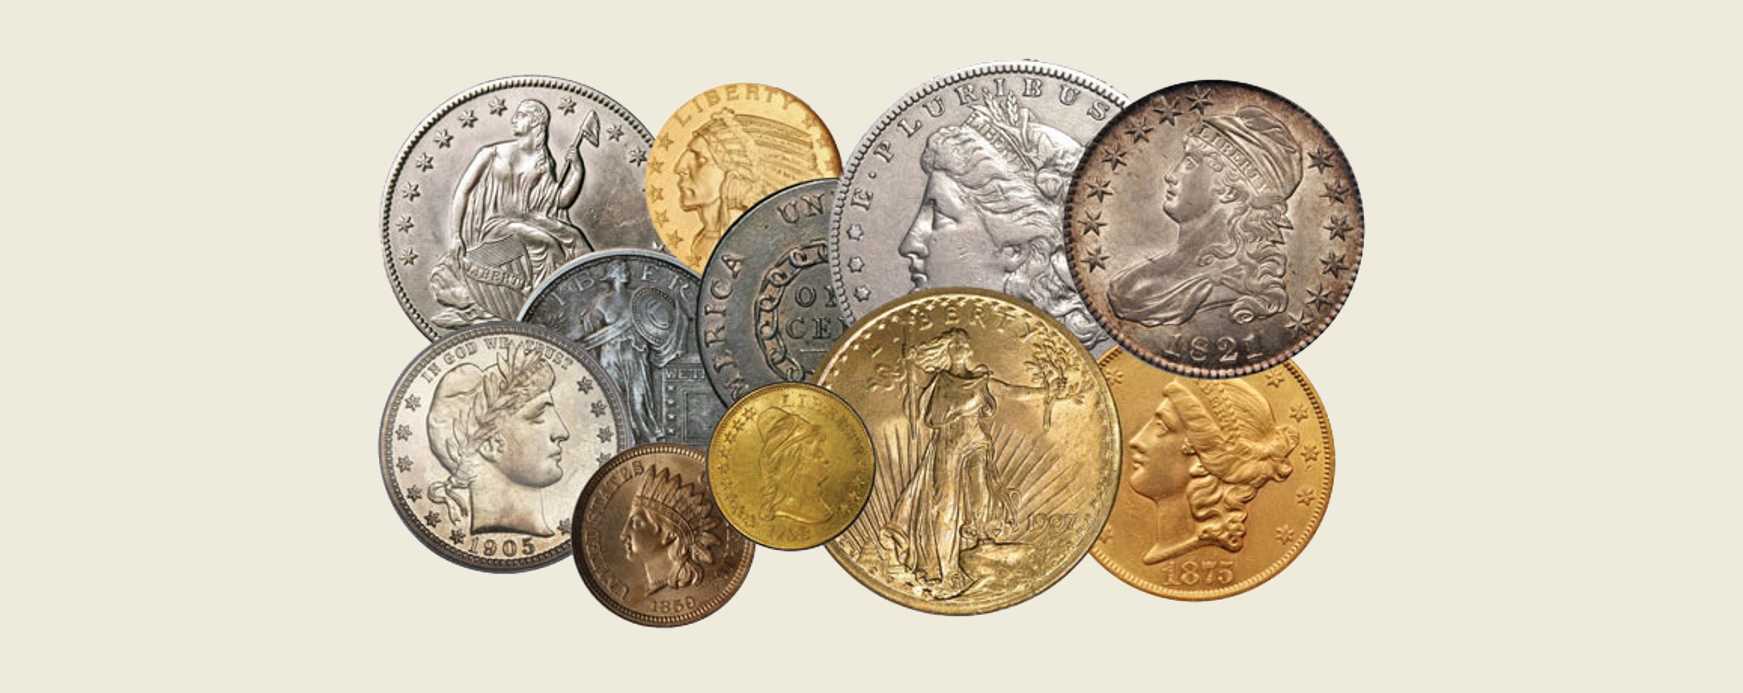 We buy and sell U.S. and Foreign Coins